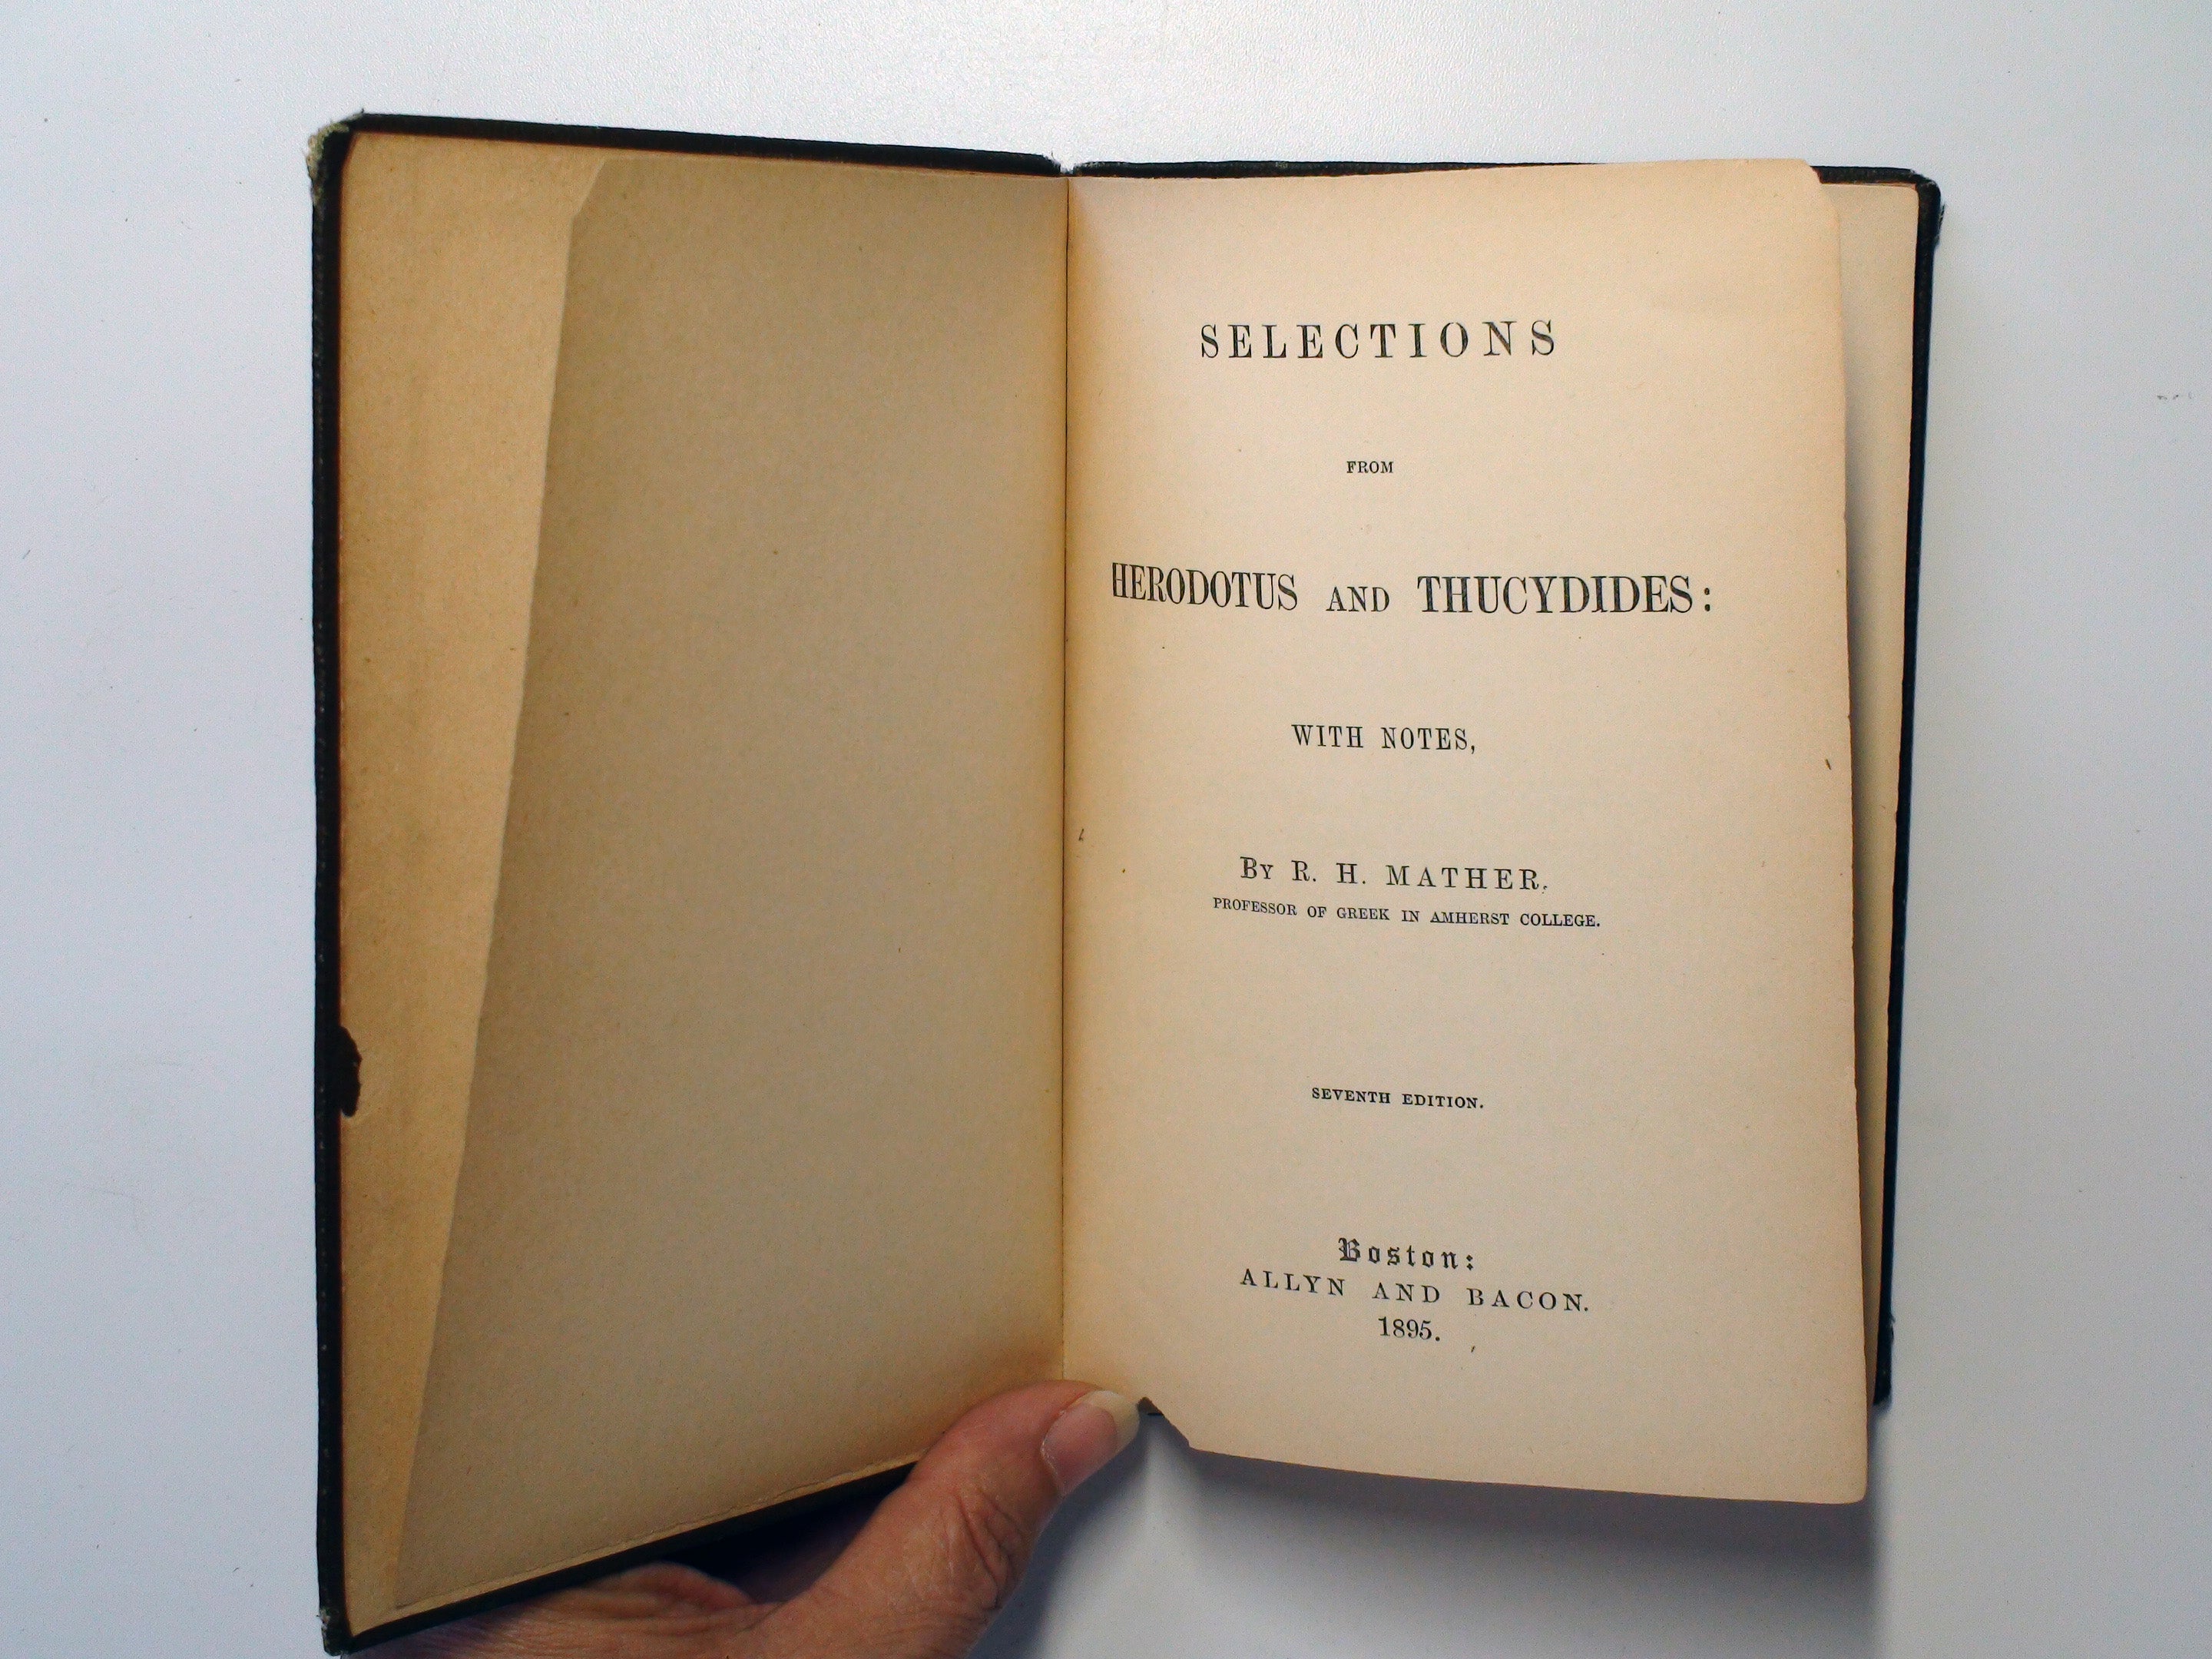 Selections From Herodotus and Thucydides, by R. H. Mather, 7th Ed, in Greek & English, 1895